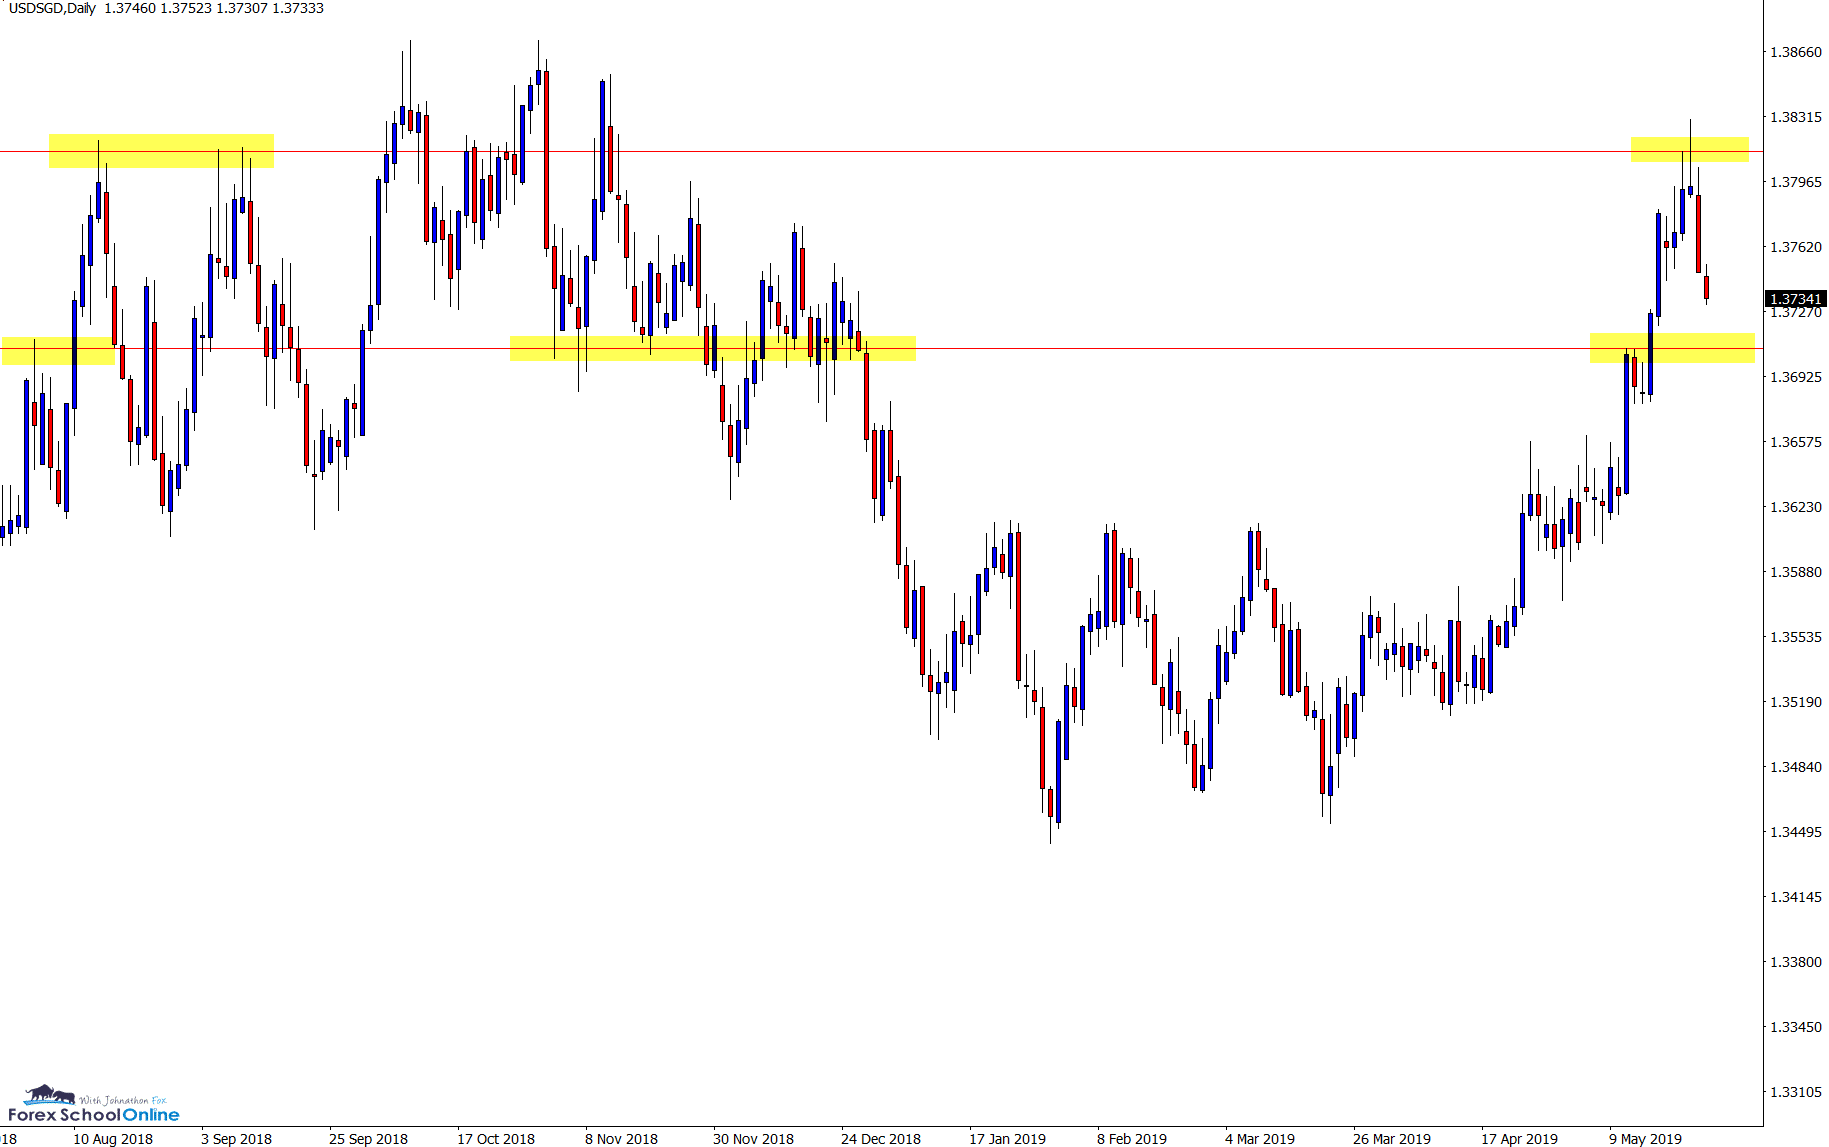 USDSGD Daily Zoomed Out